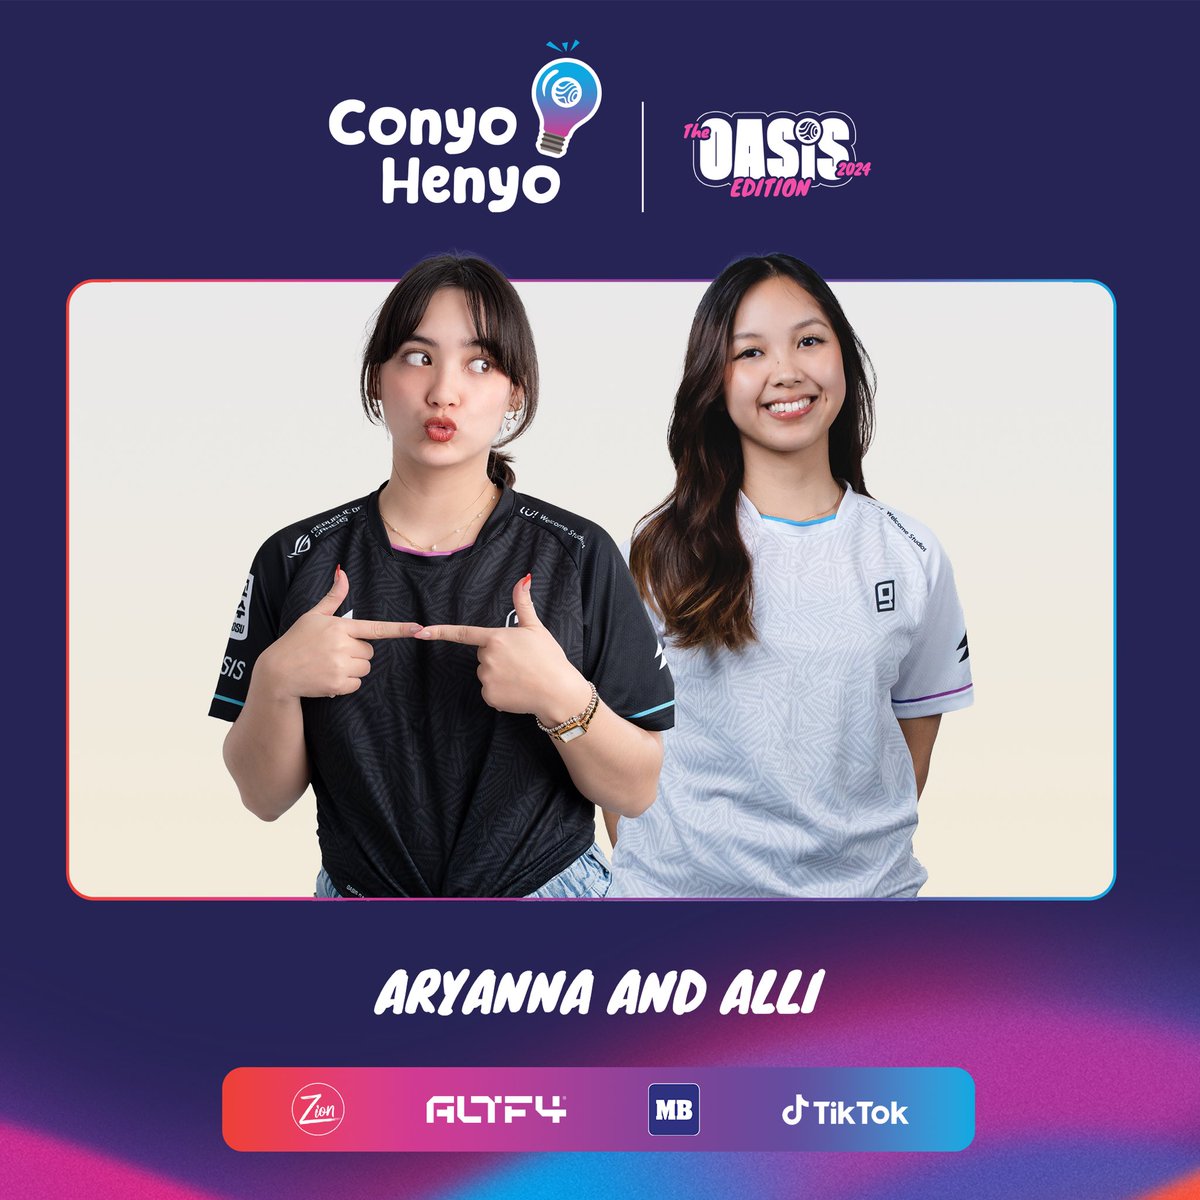 Eto pare both real cuties made pasok the Conyo Henyo, no cap bro 😍 They are here to prove that they’re not just cute, they are also certified conyo. Welcome, @aryannaepperson and @allisonmrey! Watch them make hula words tomorrow on Conyo Henyo at 6PM! #ConyoHenyo #SinceDayOne